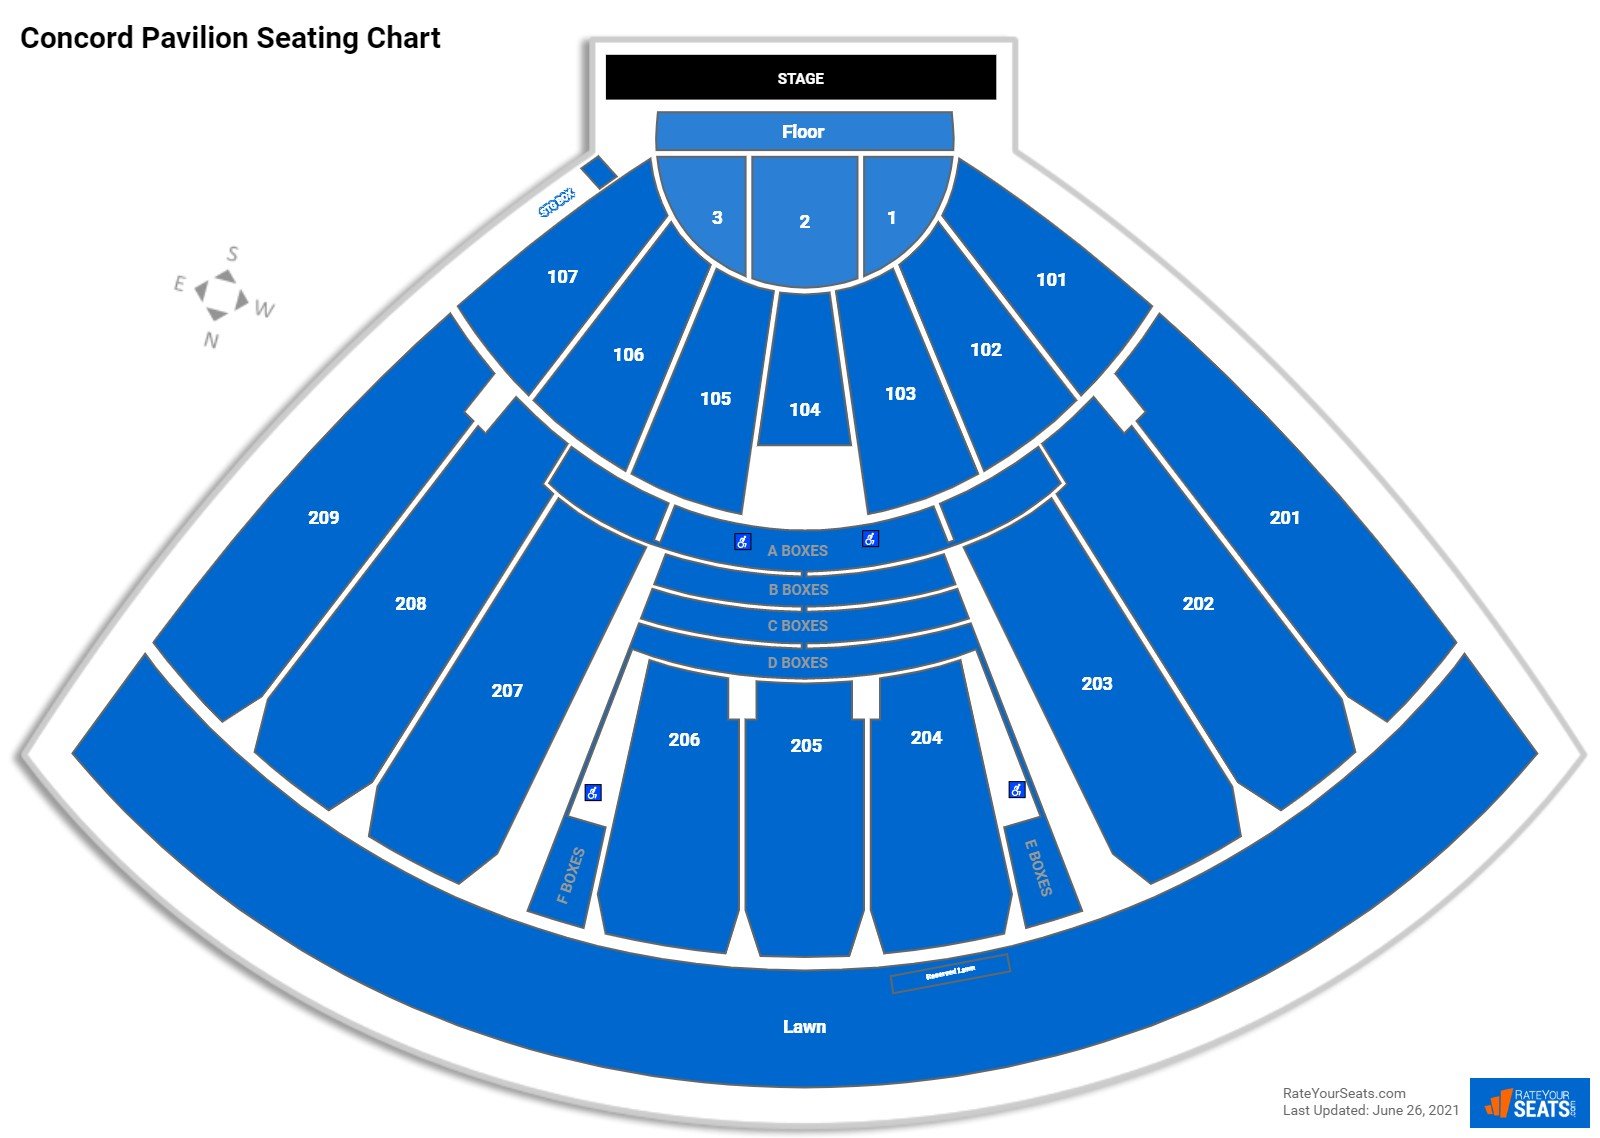 Concord Pavilion Concert Seating Chart